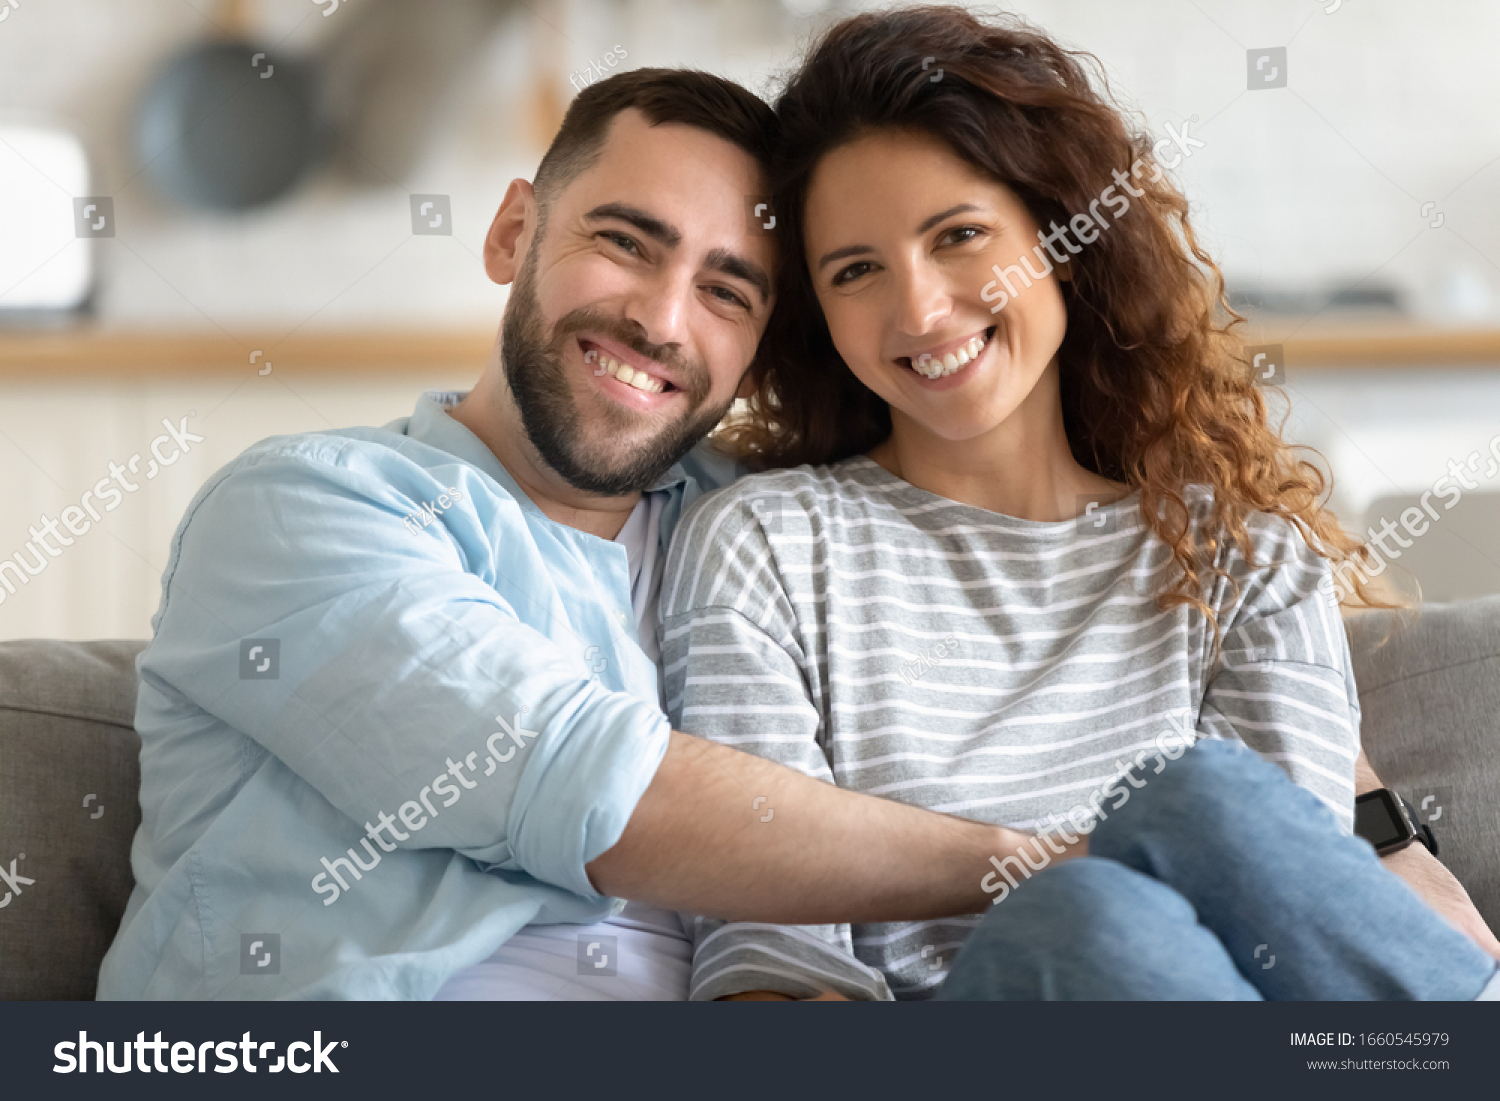 Family portrait of happy millennial husband and wife sit on couch hug cuddle look at camera posing, smiling young couple embrace show love affection, relax at home on weekend together #1660545979